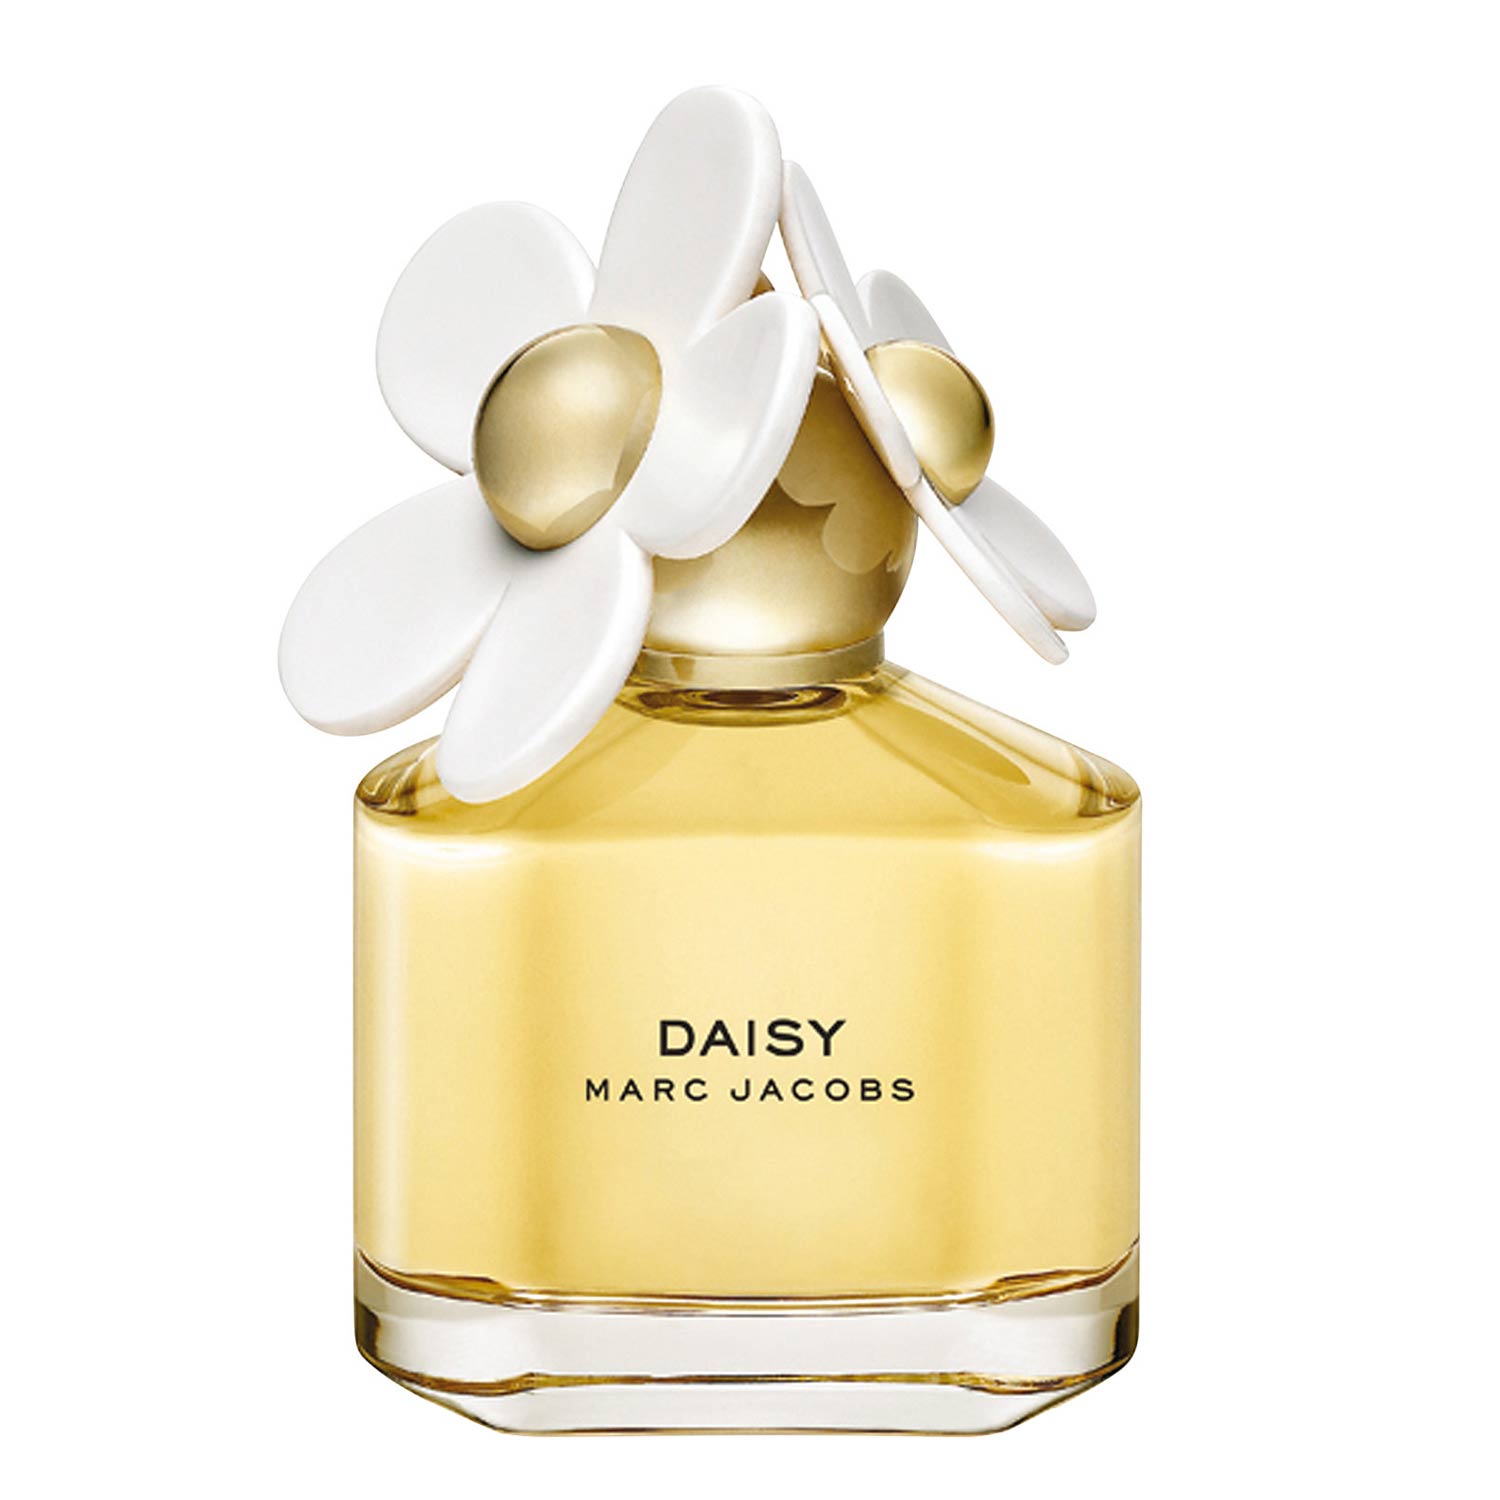 Daisy Marc Jacobs Image